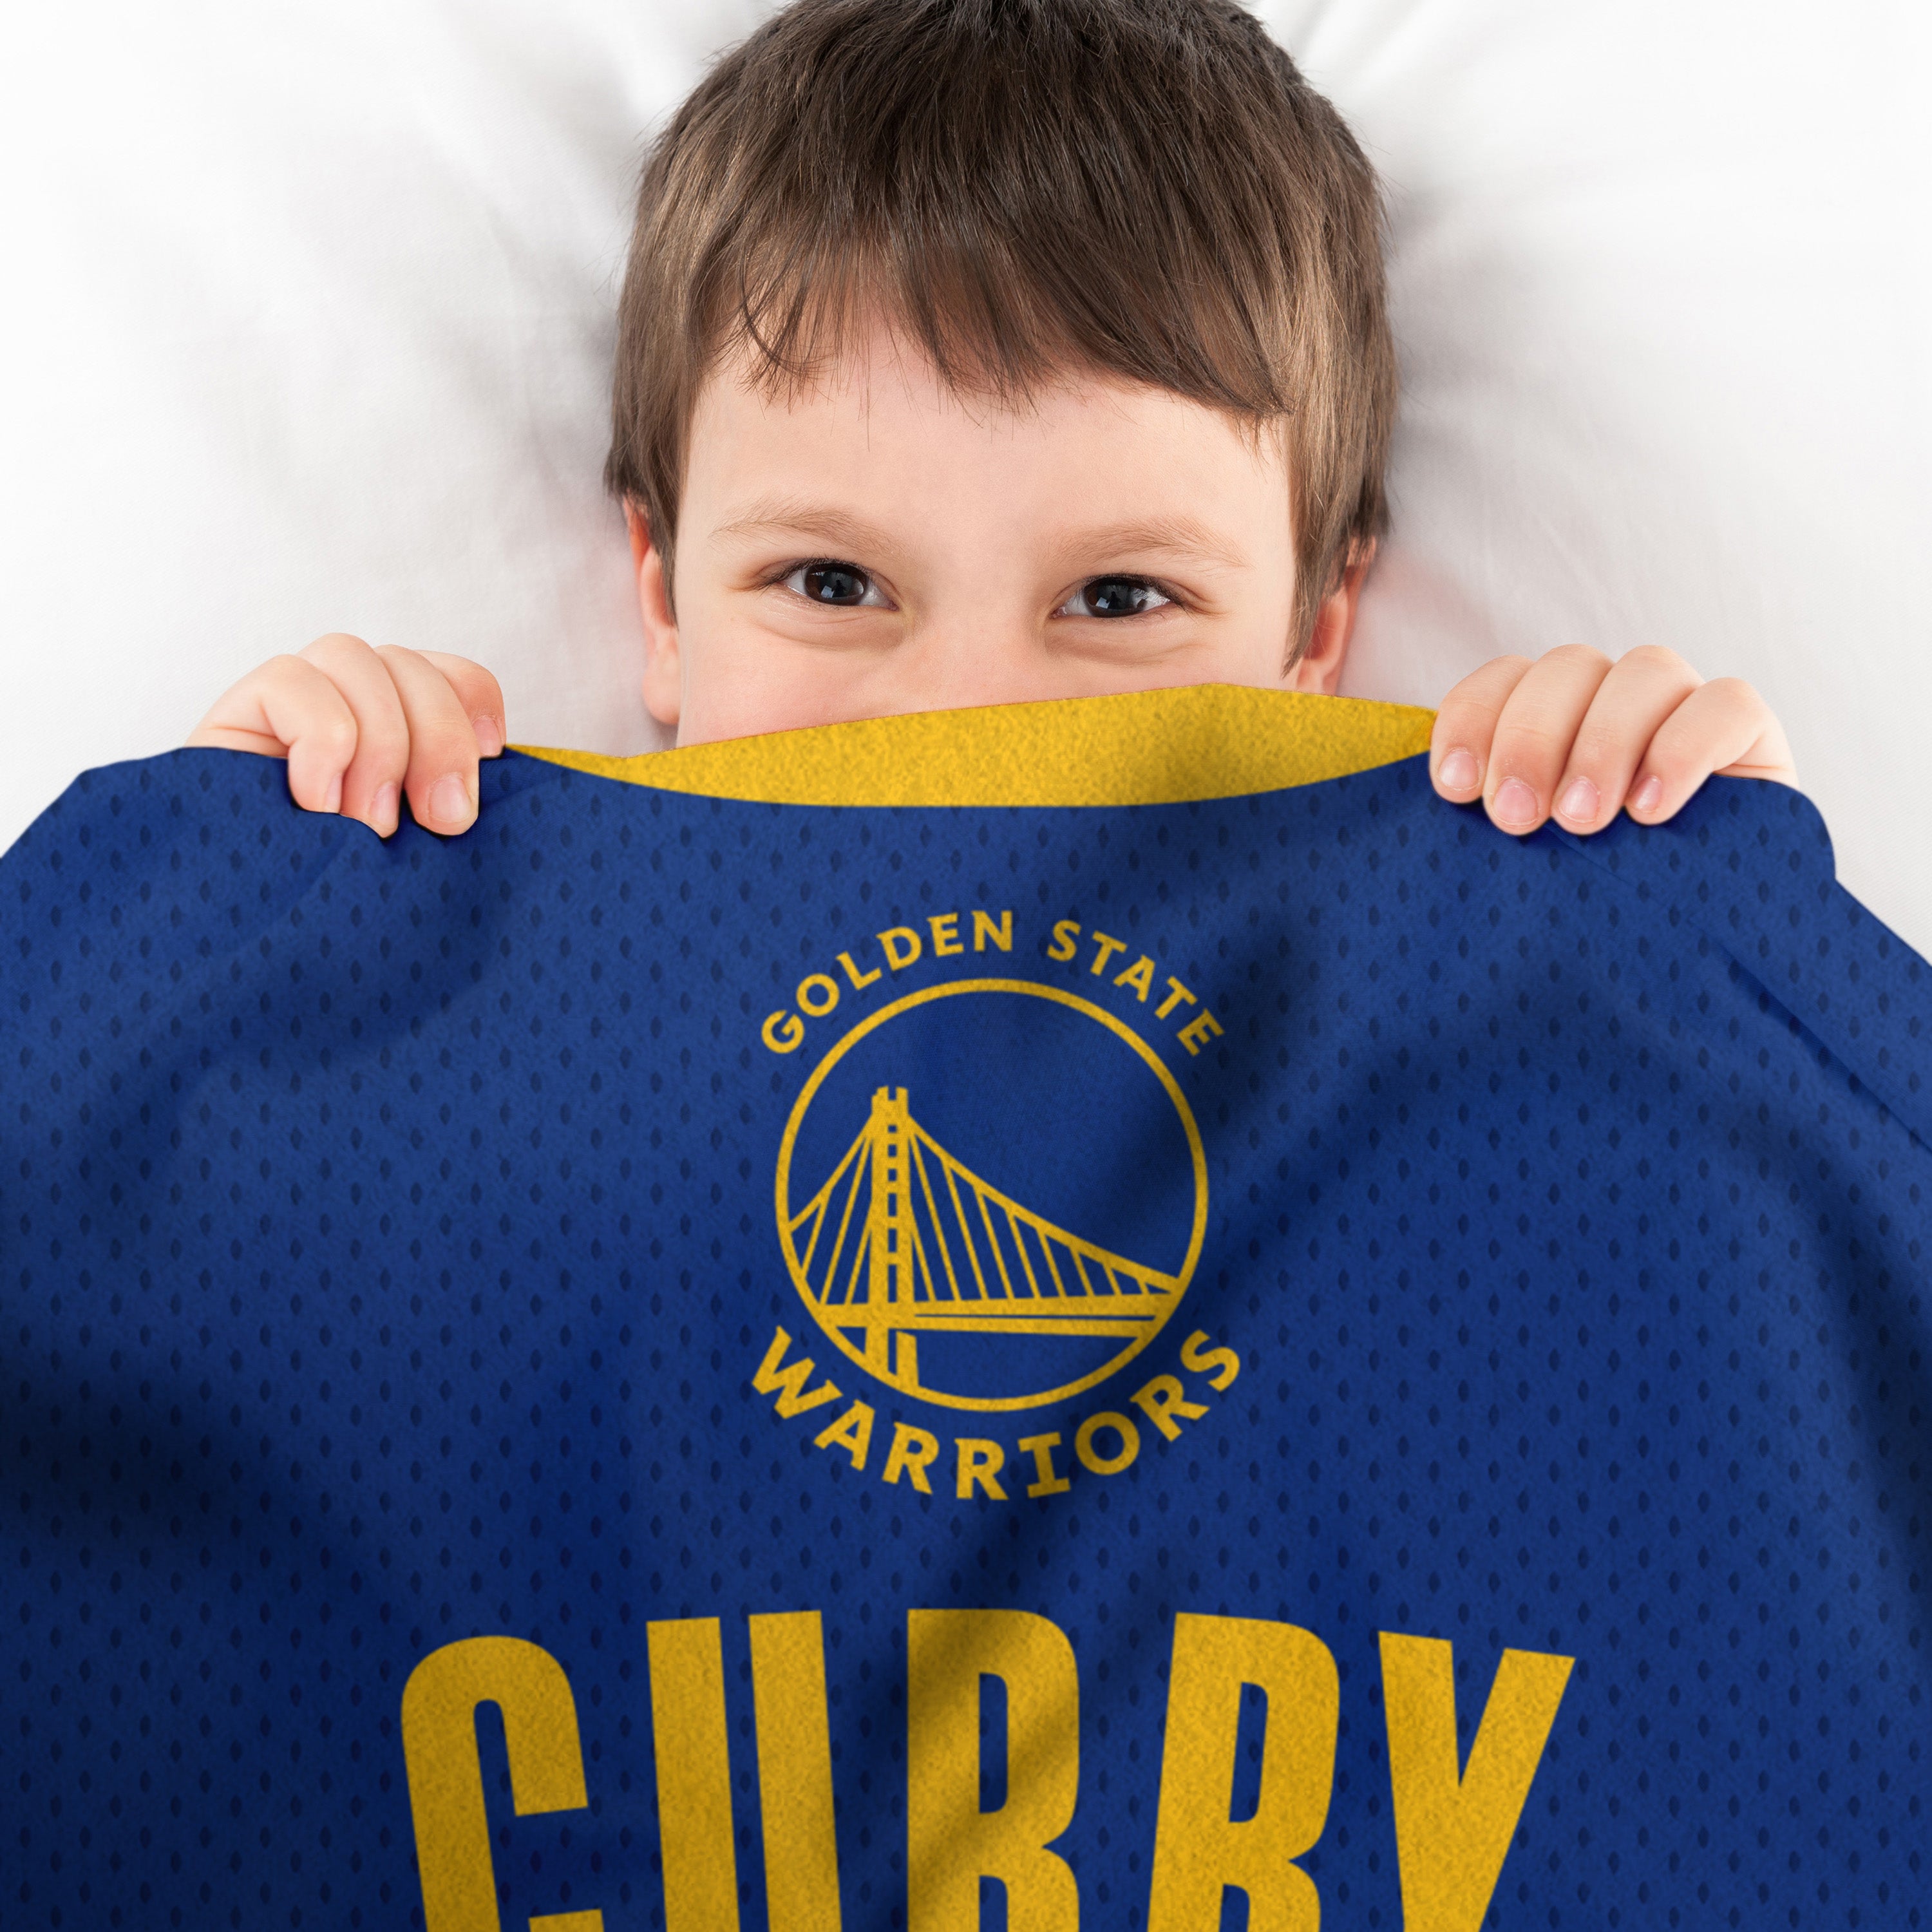 Golden State Warriors Baby Clothing, Warriors Infant Jerseys, Toddler  Apparel